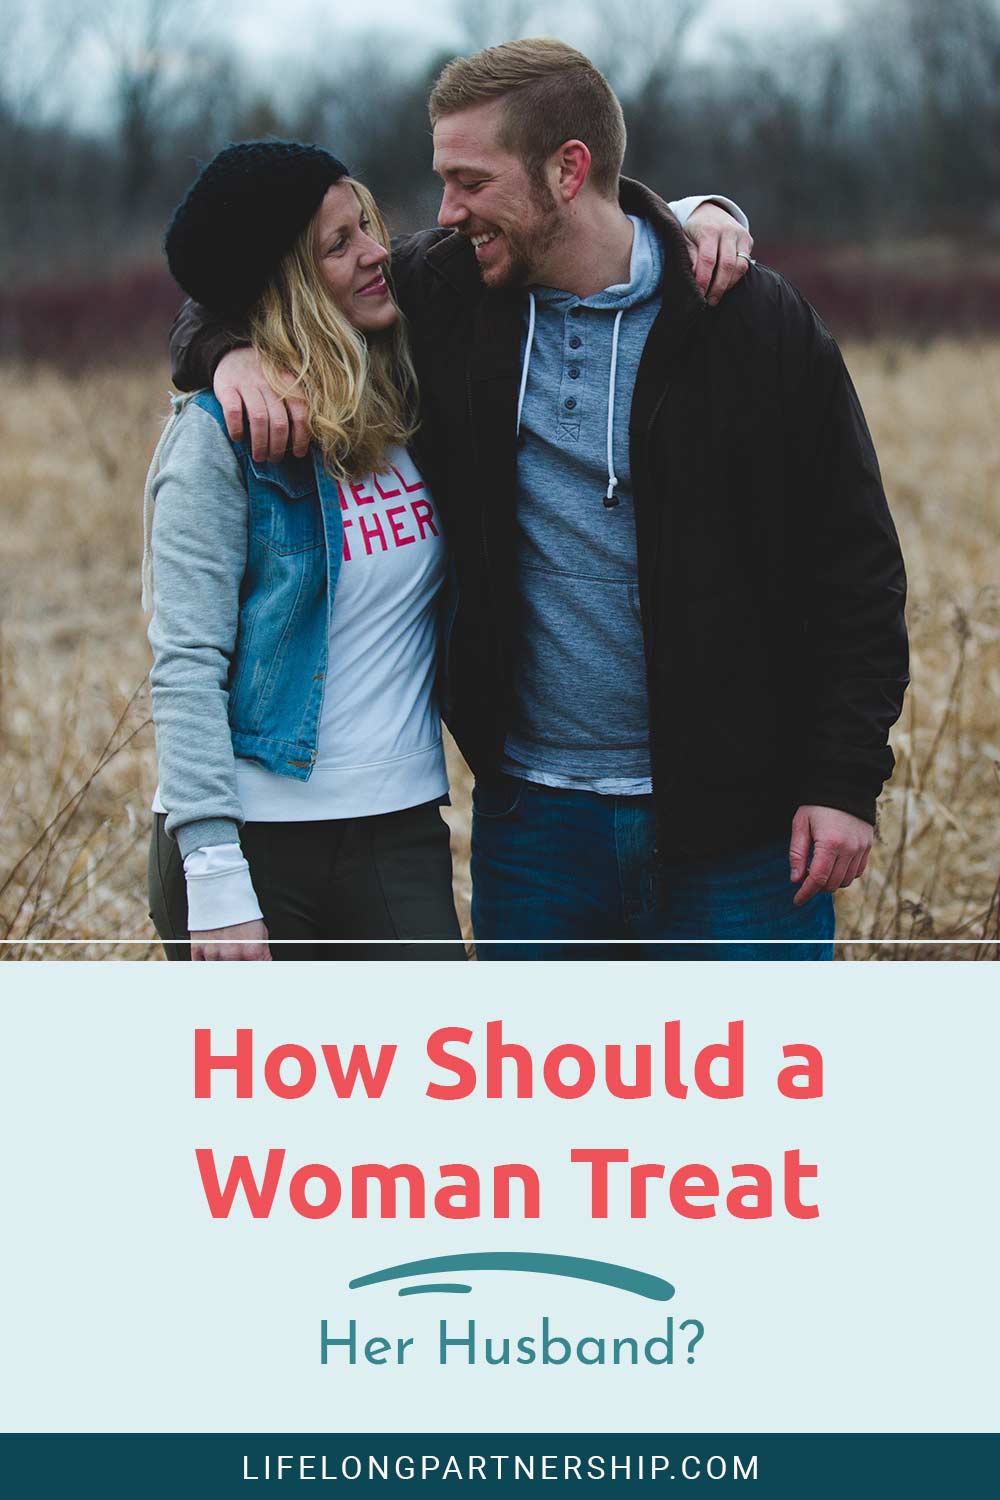 Man and woman has put hand on each other's shoulders standing in a field - How Should a Woman Treat Her Husband?